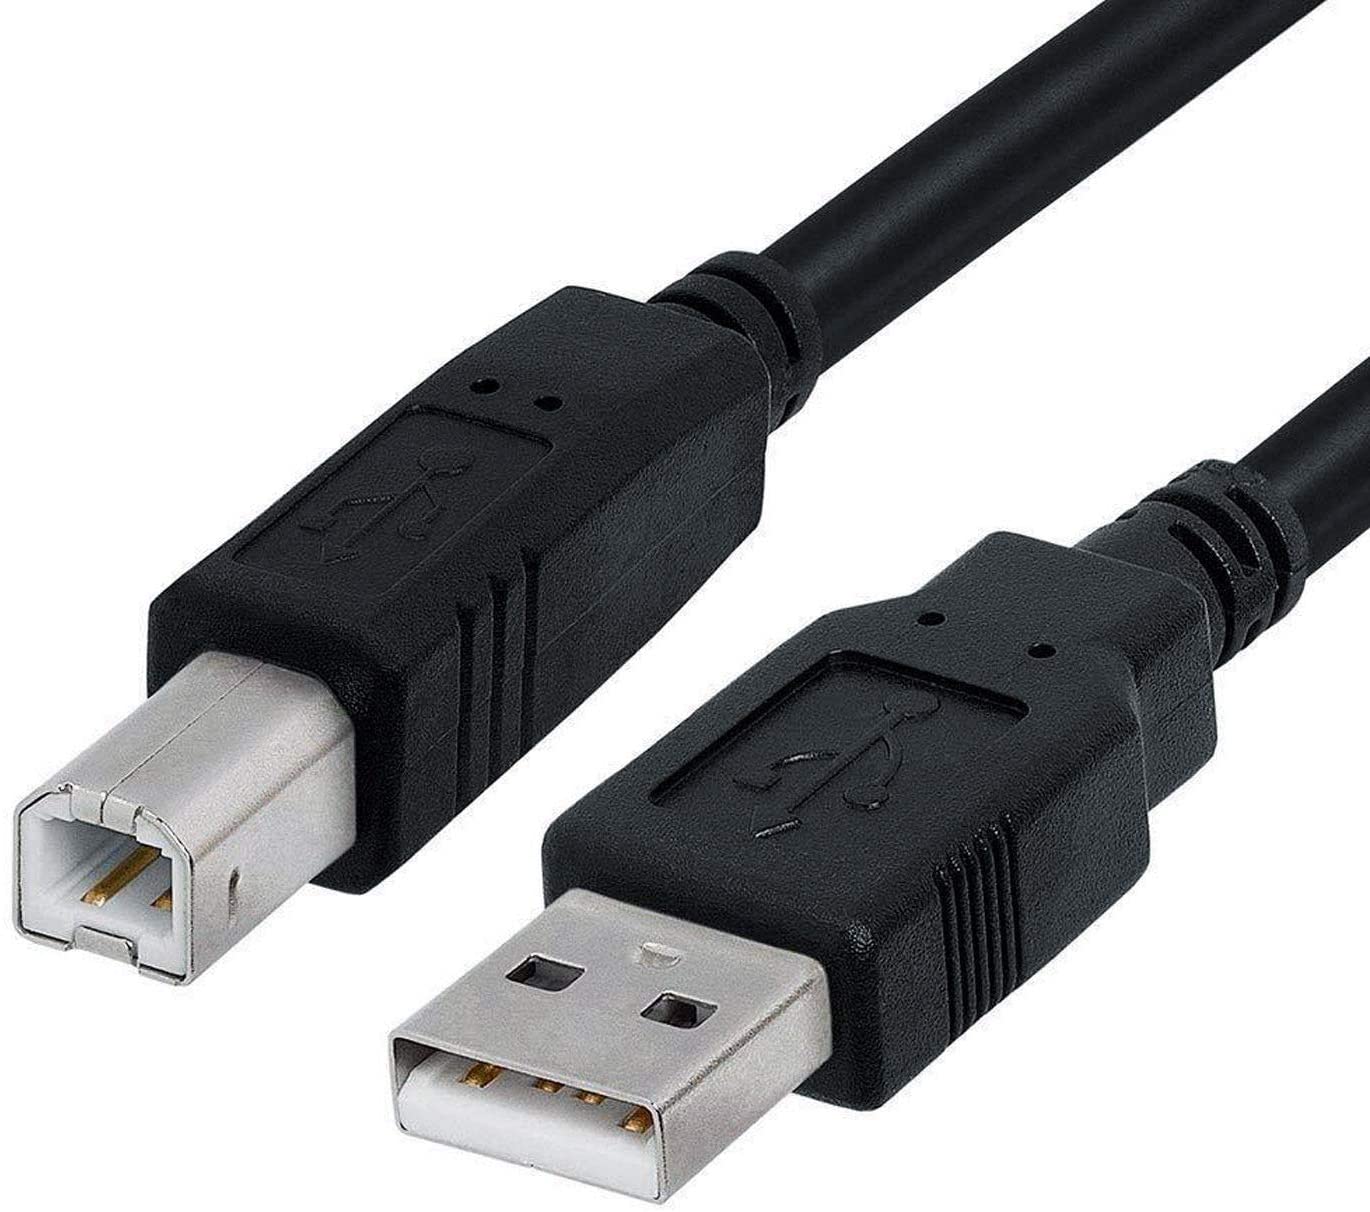 1 5m USB 2 0 High Speed Cable Long Printer Lead A to B%20(2)